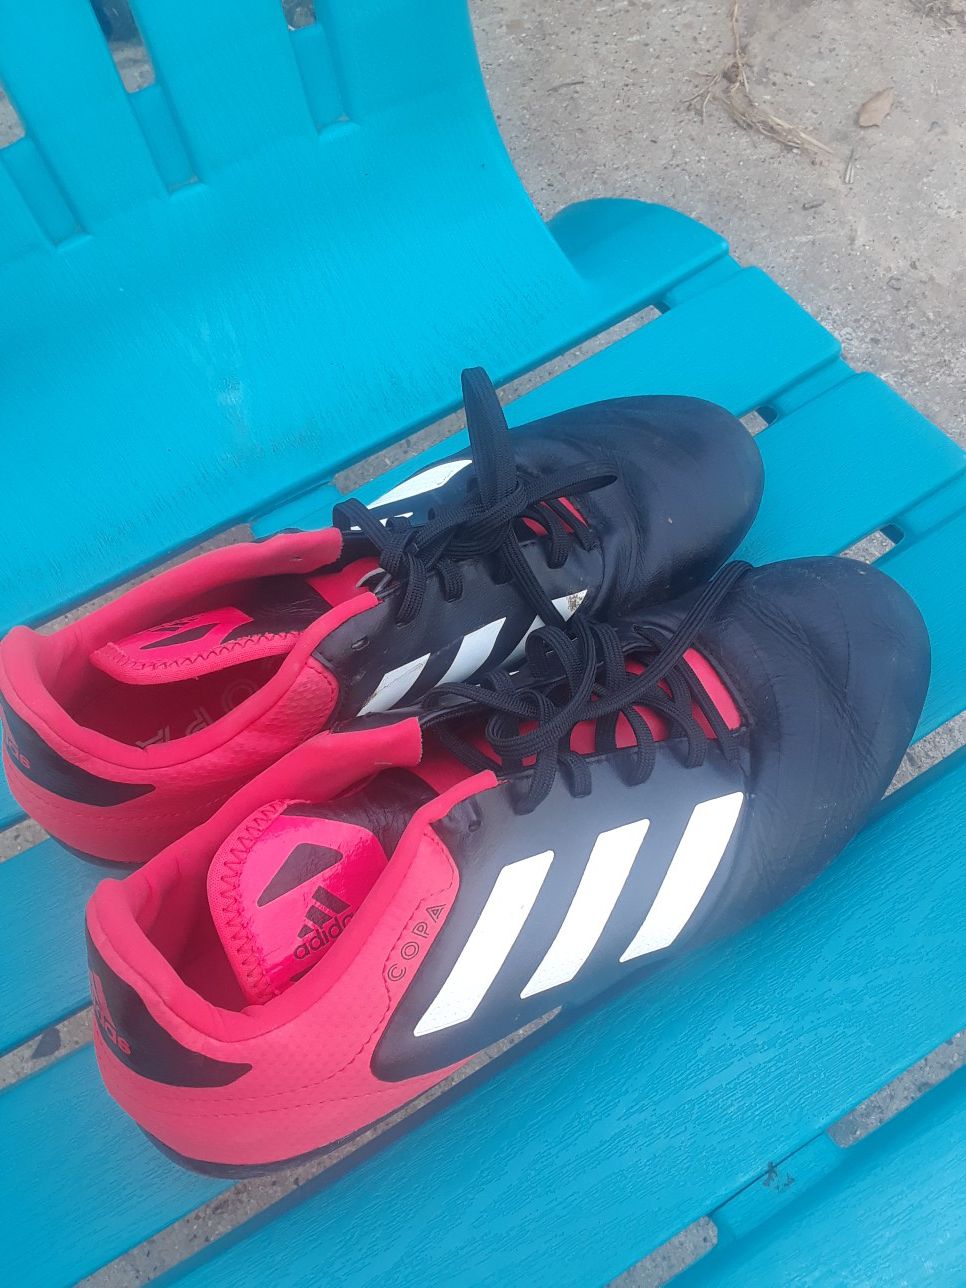 Red Adidas Cleats (size 81/2) $25.00 cash only ( Serious Buyers Only)